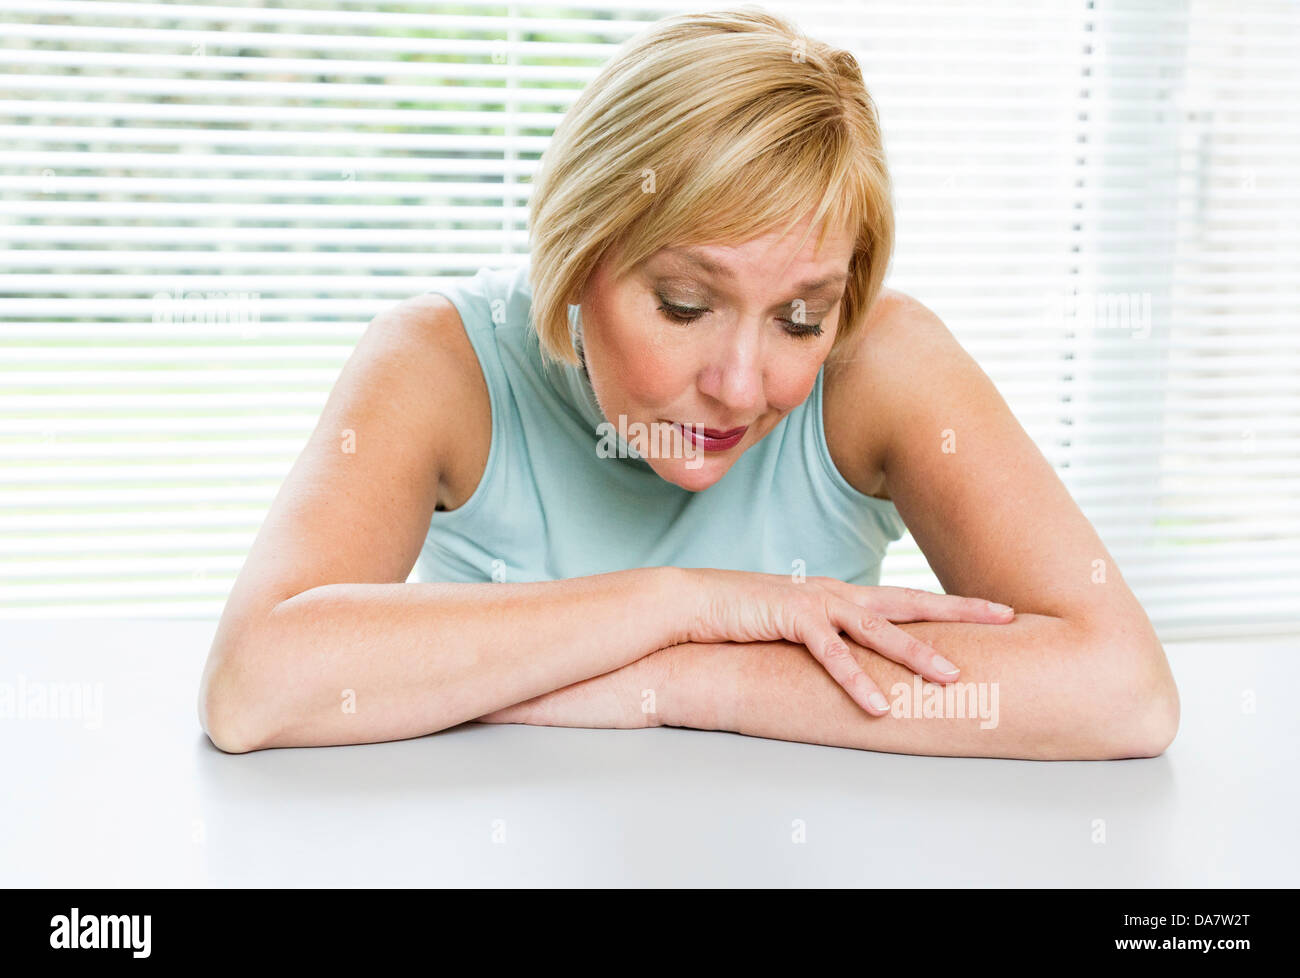 woman looking worried and concerned Stock Photo